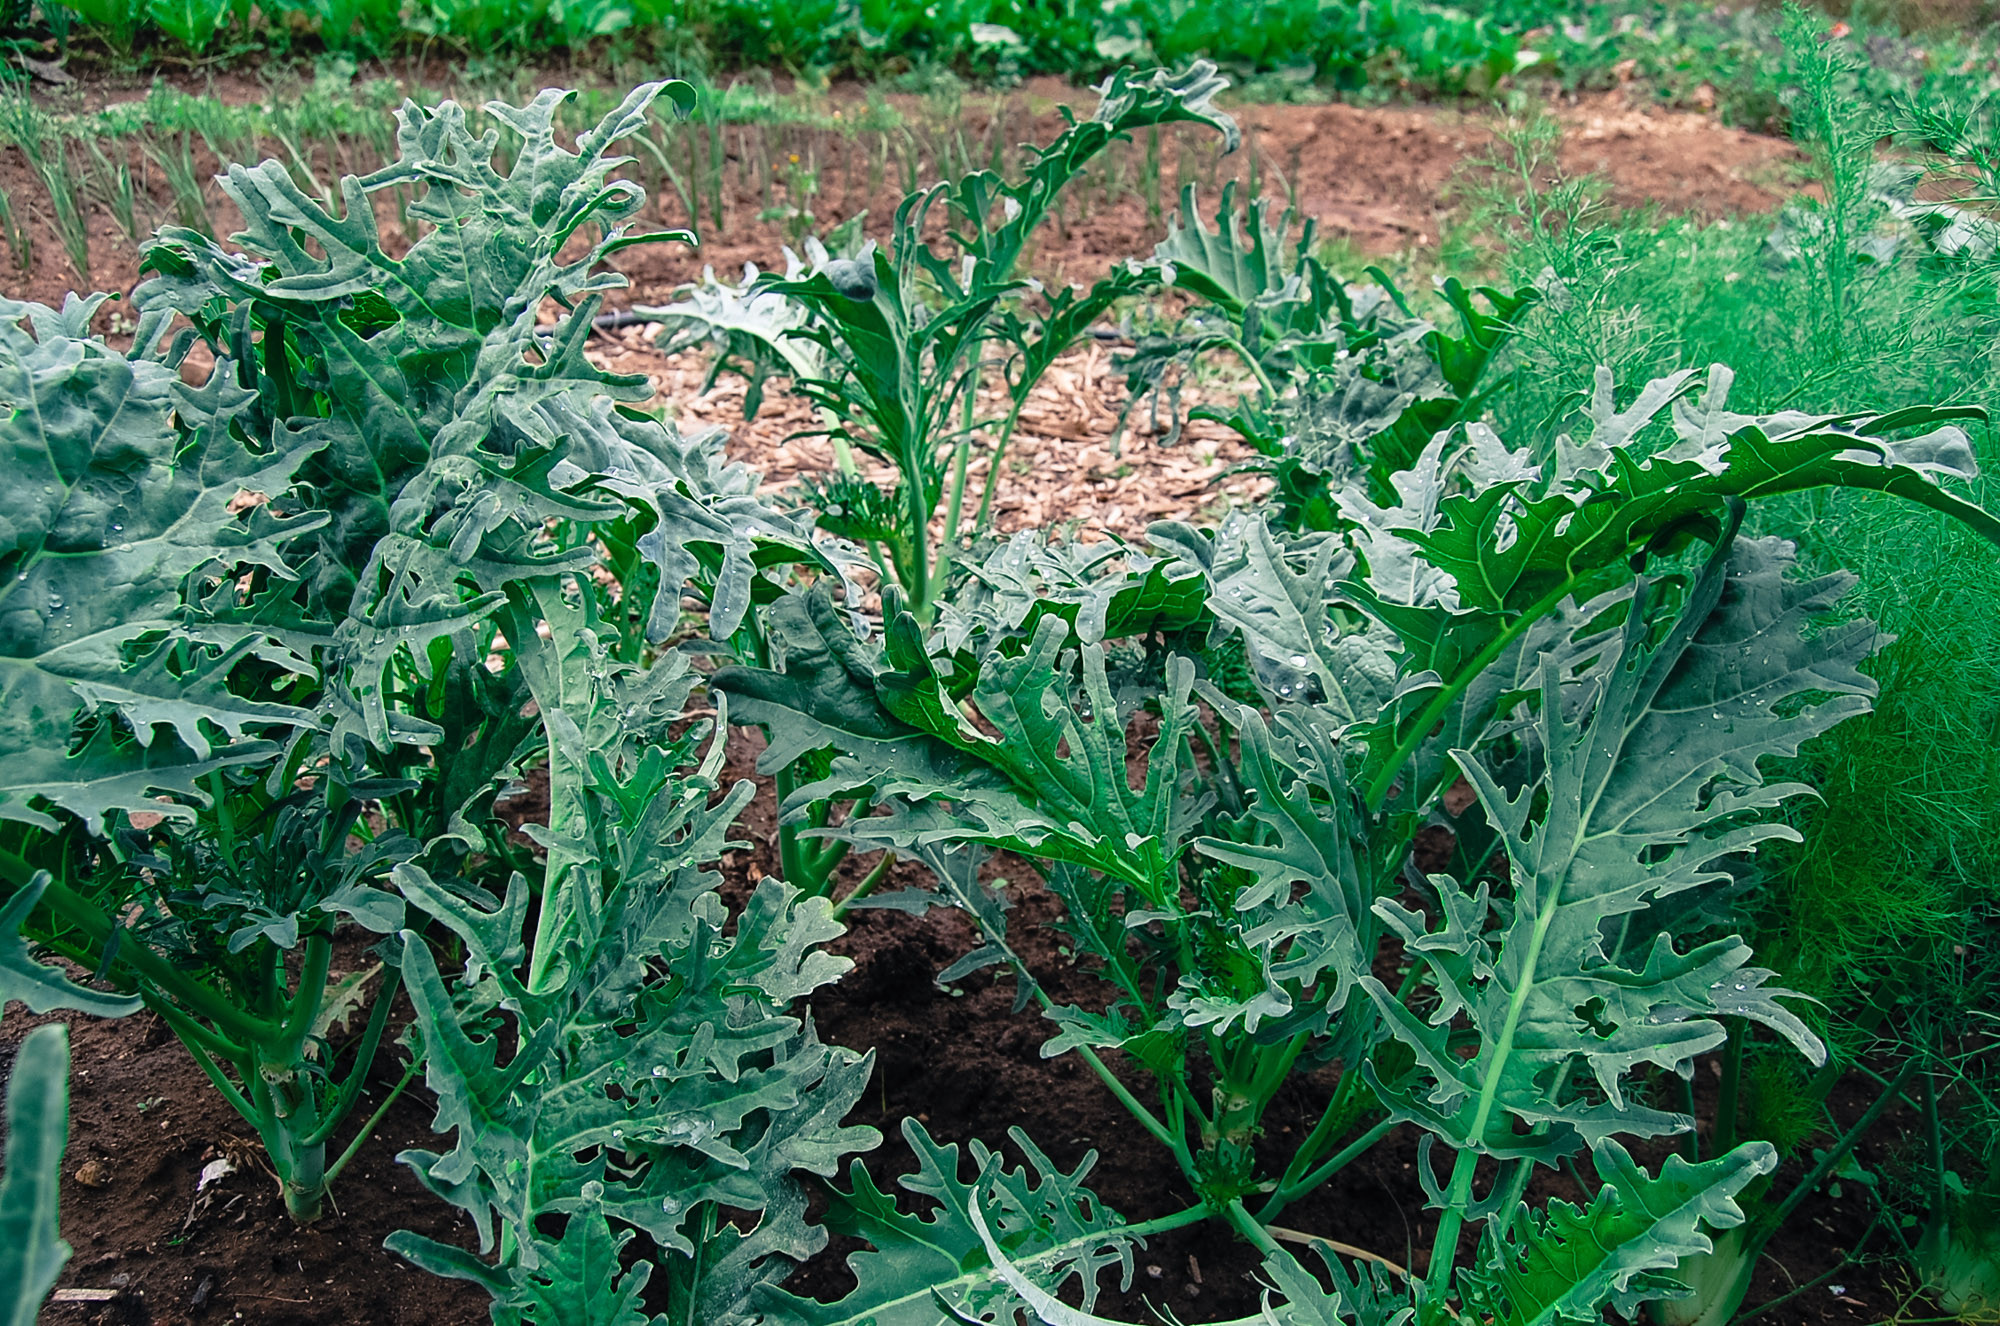 Grow Fizz kale either for baby greens or full-sized kale.